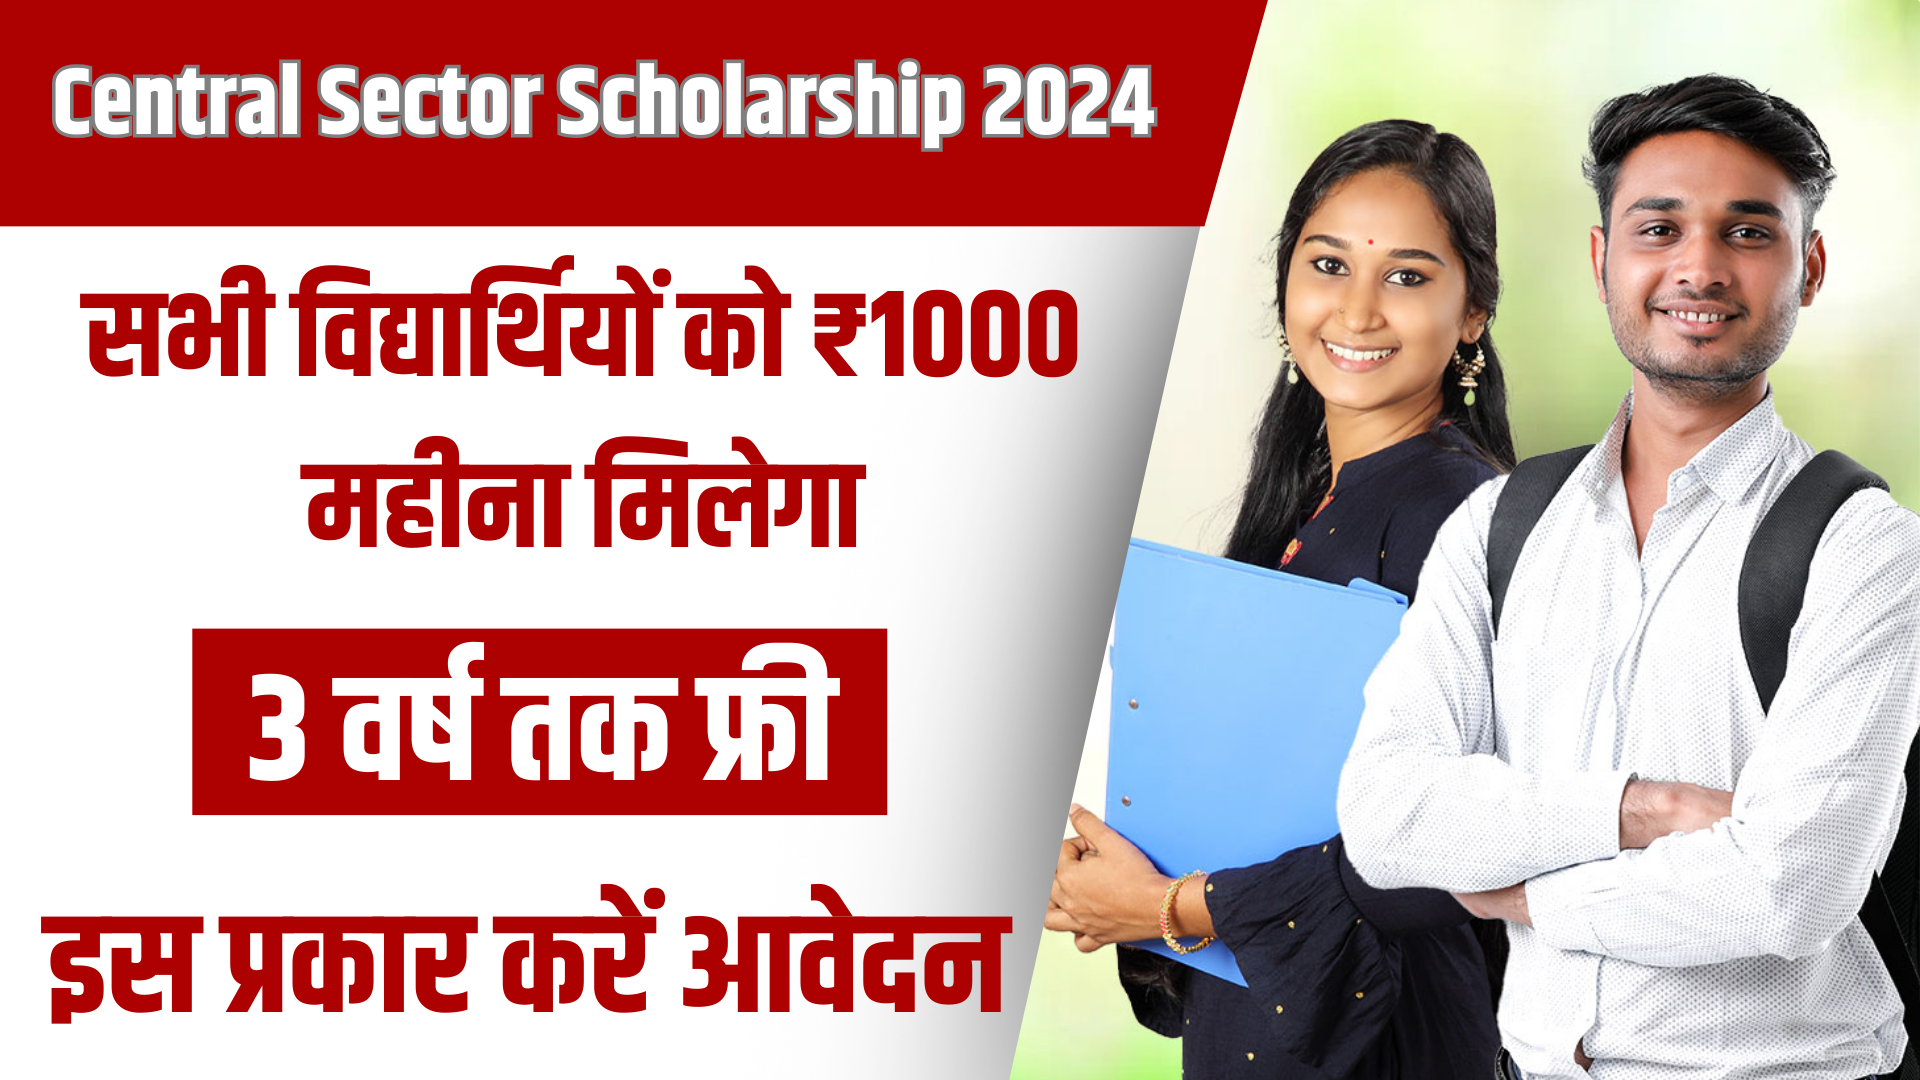 Central Sector Scholarship 2024